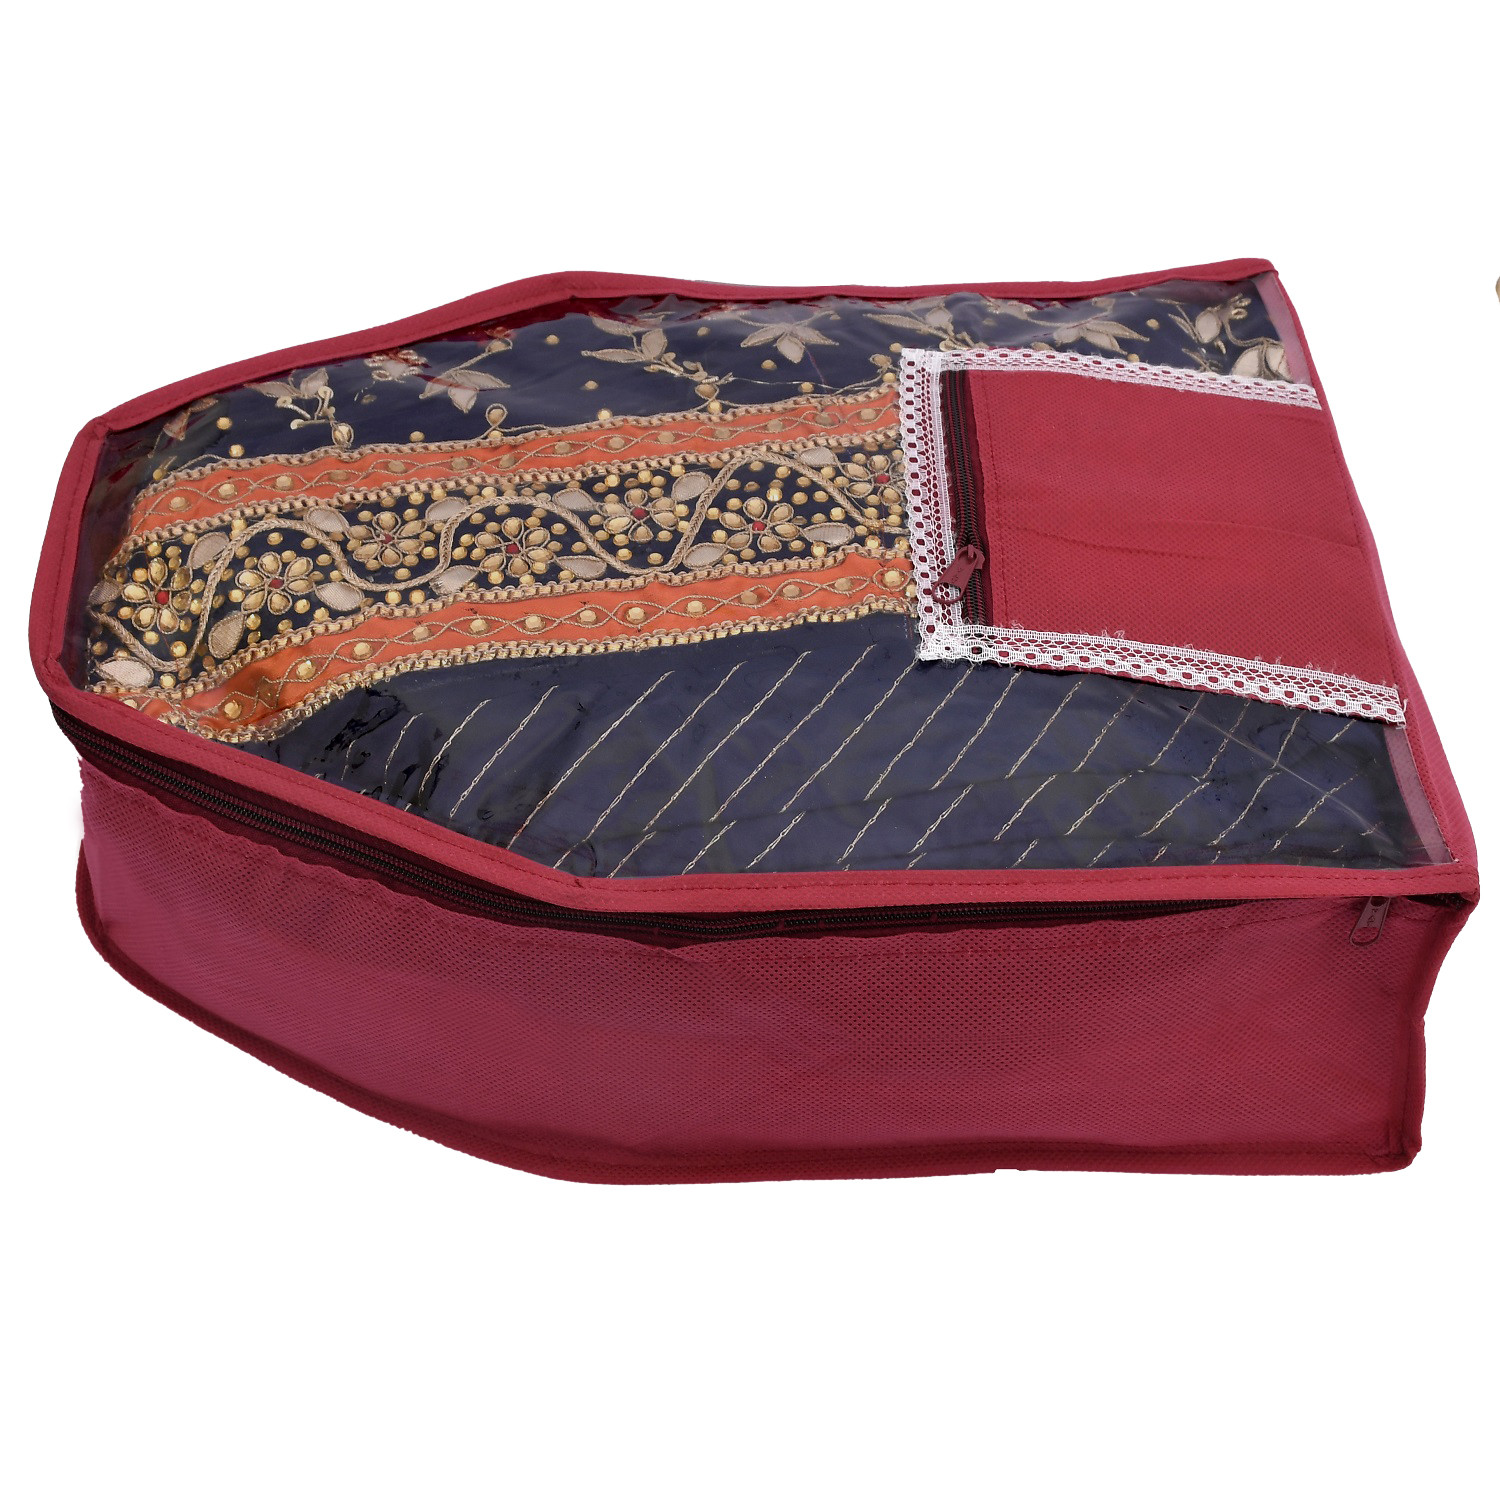 Kuber Industries Non Woven Saree Cover/Cloth Wardrobe Organizer and Blouse Cover Combo Set (Maroon)